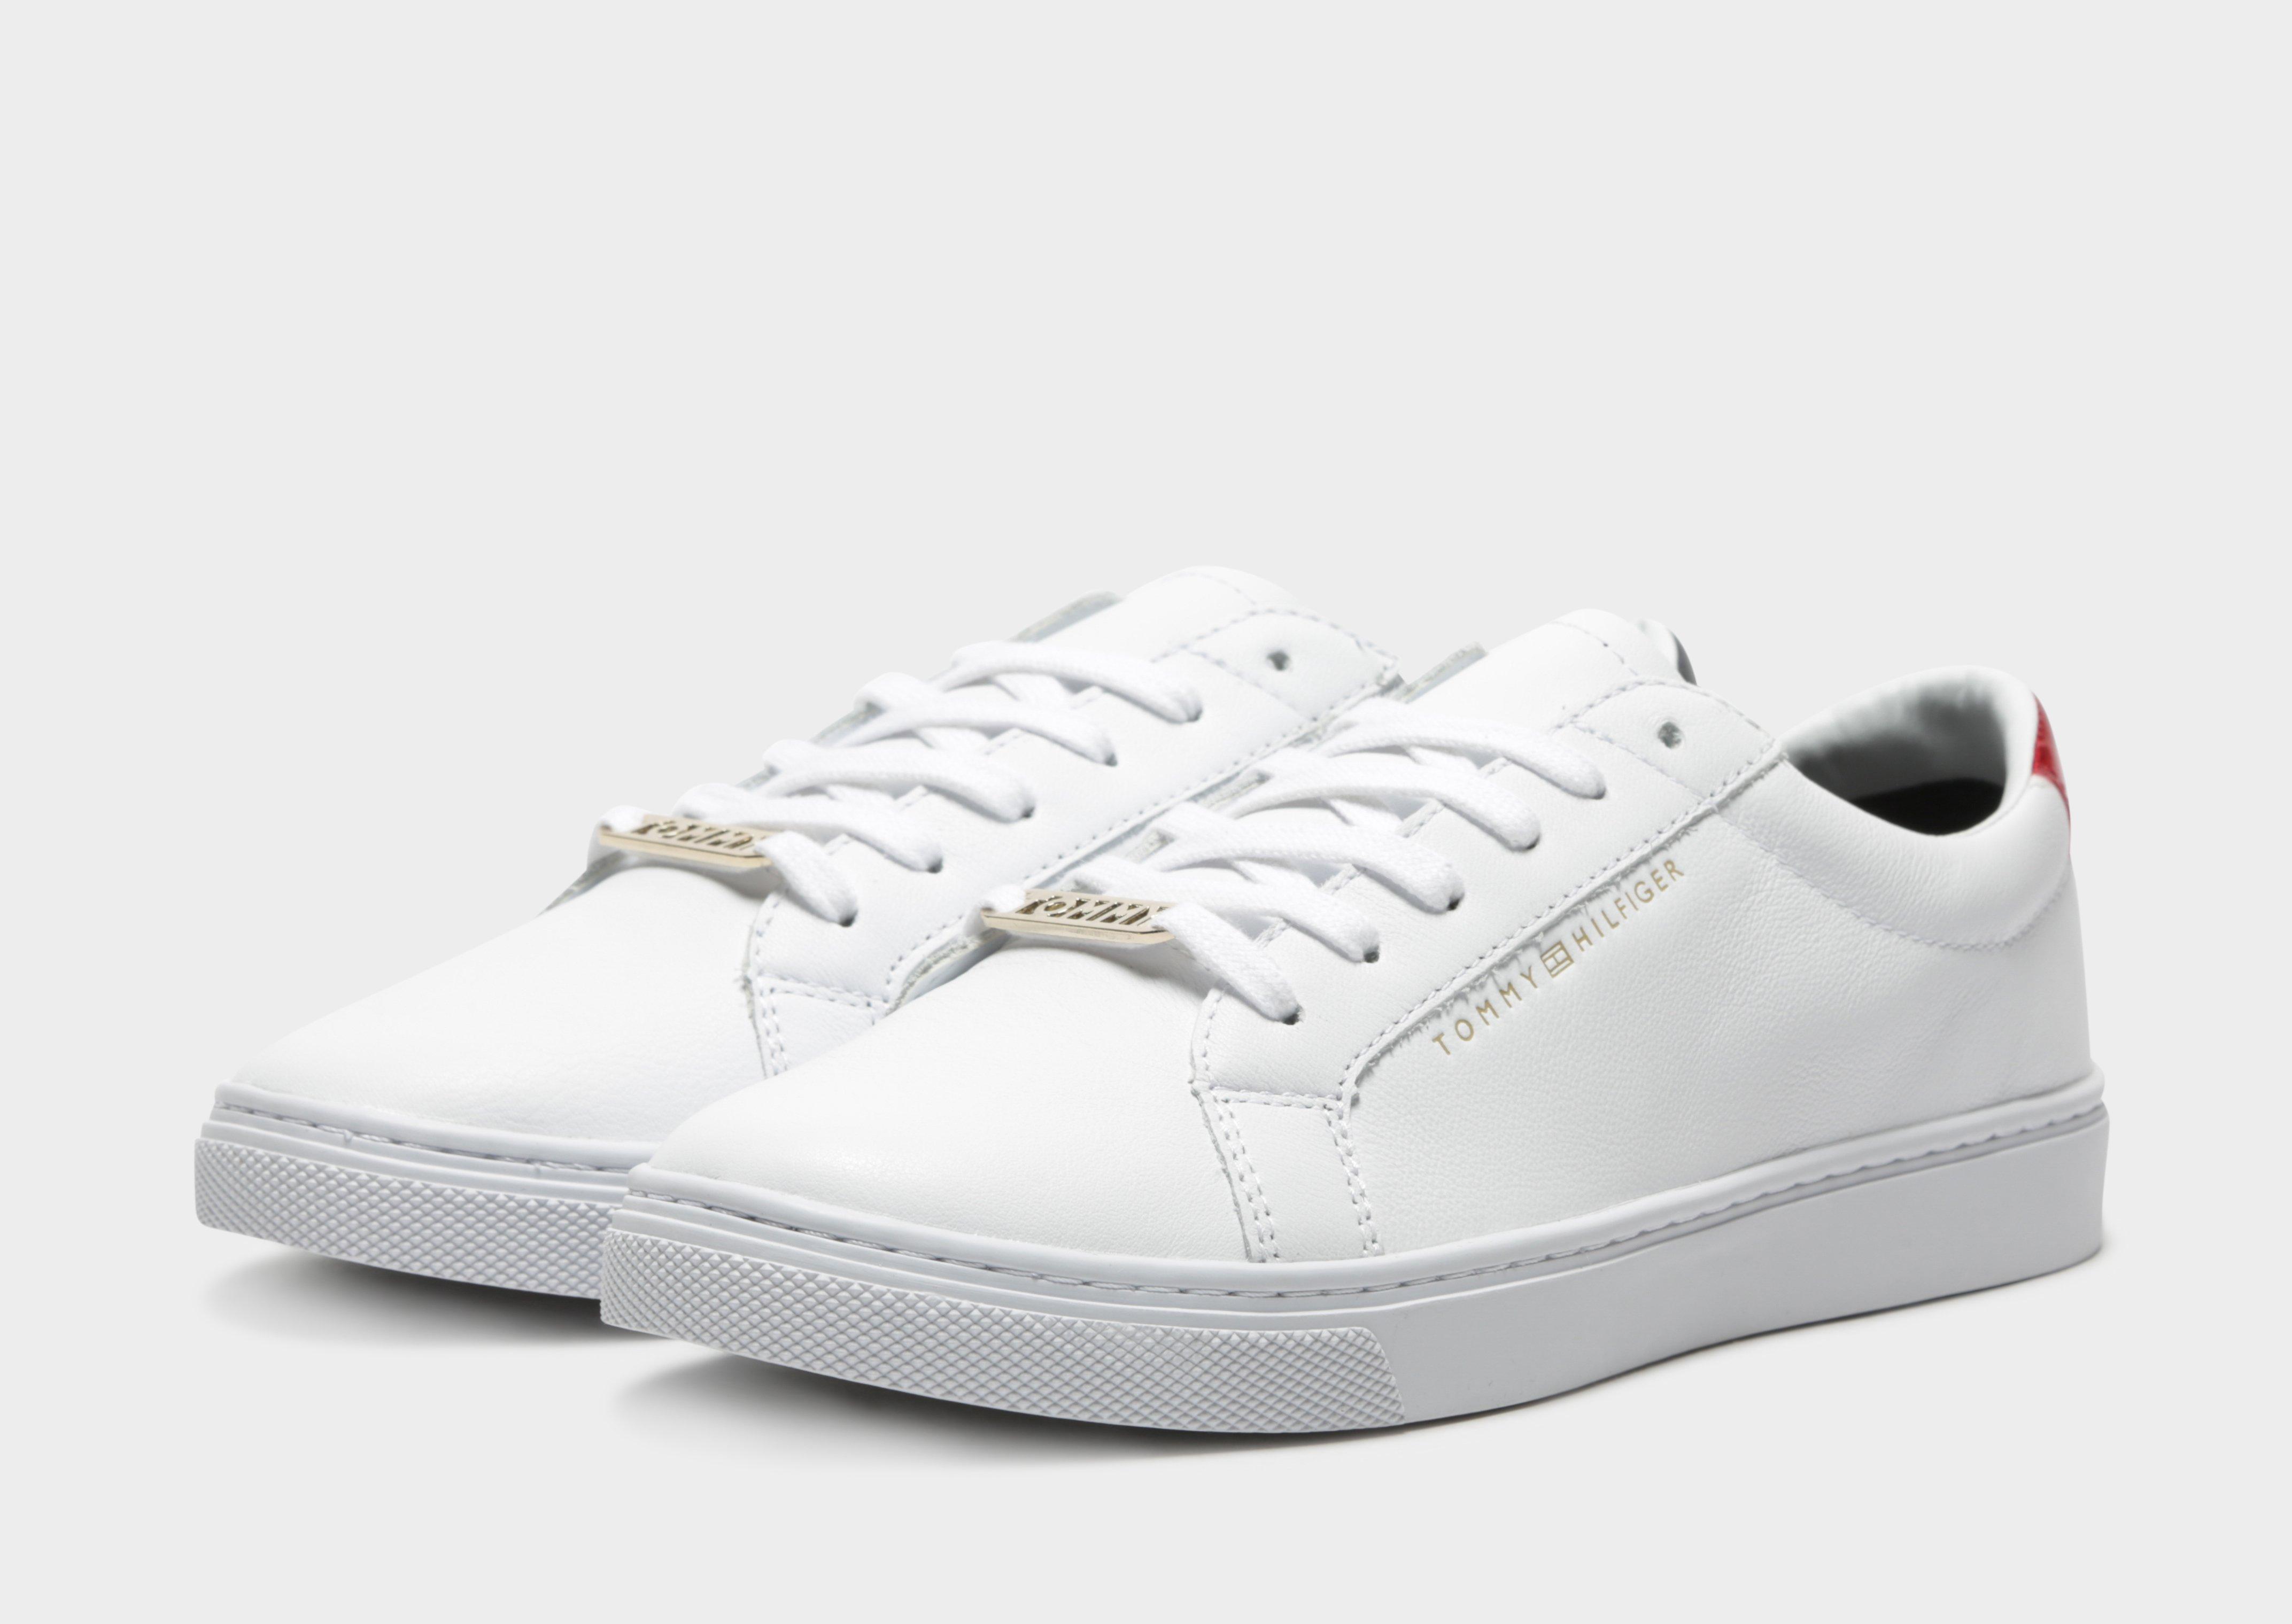 white leather tommy hilfiger shoes